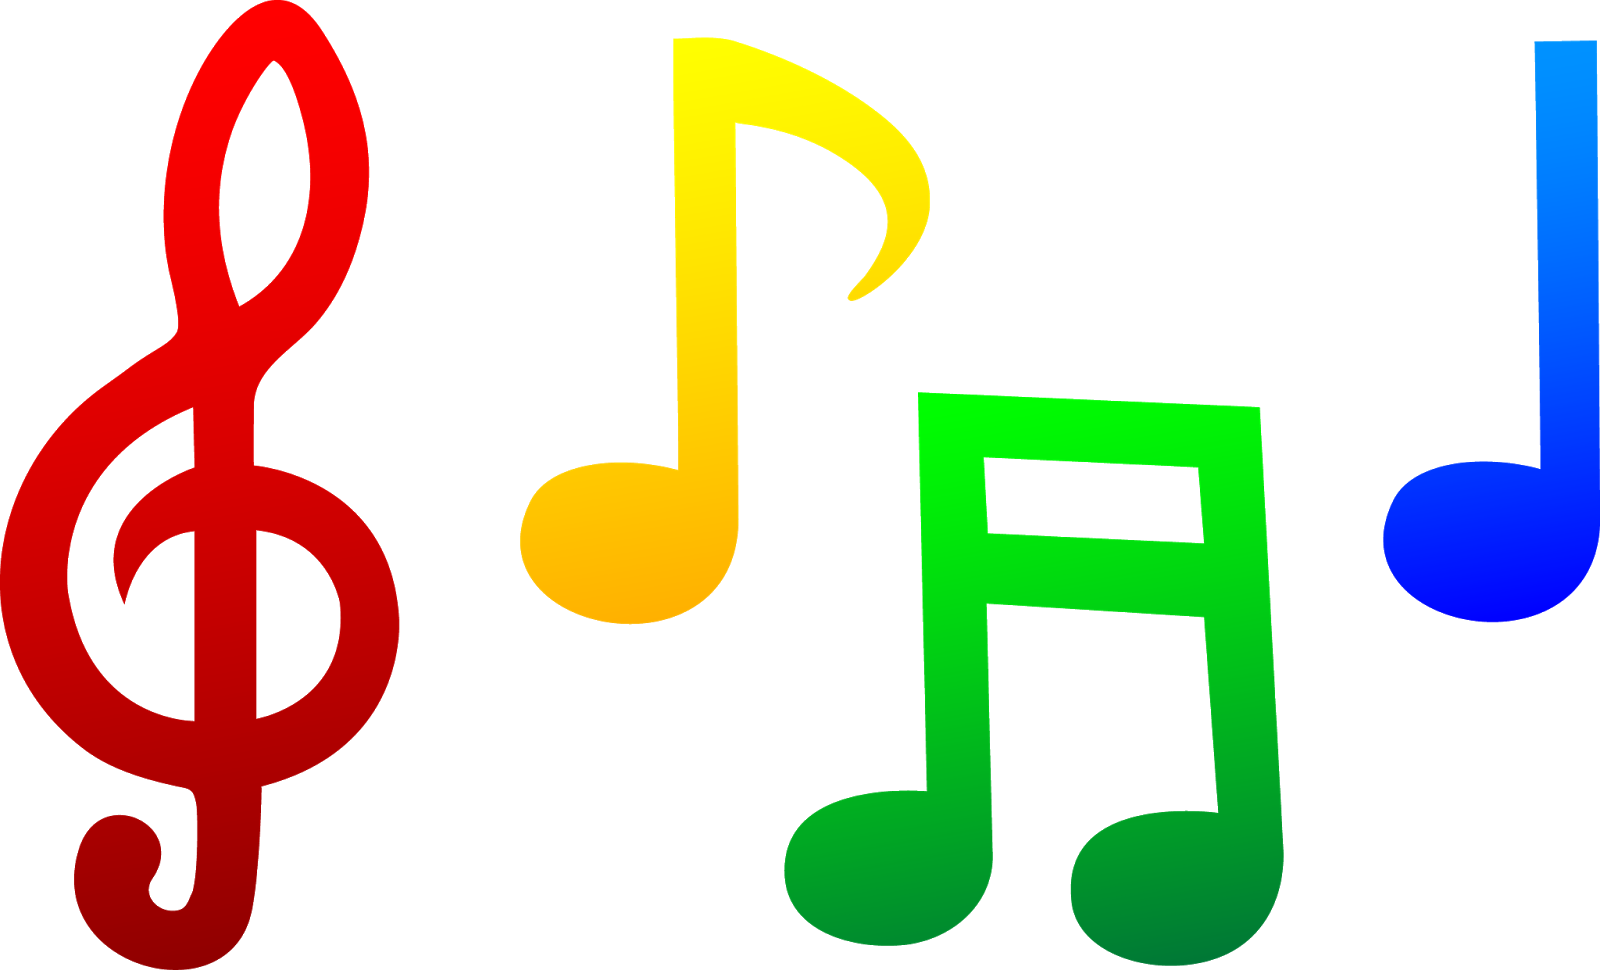 instruments clipart area